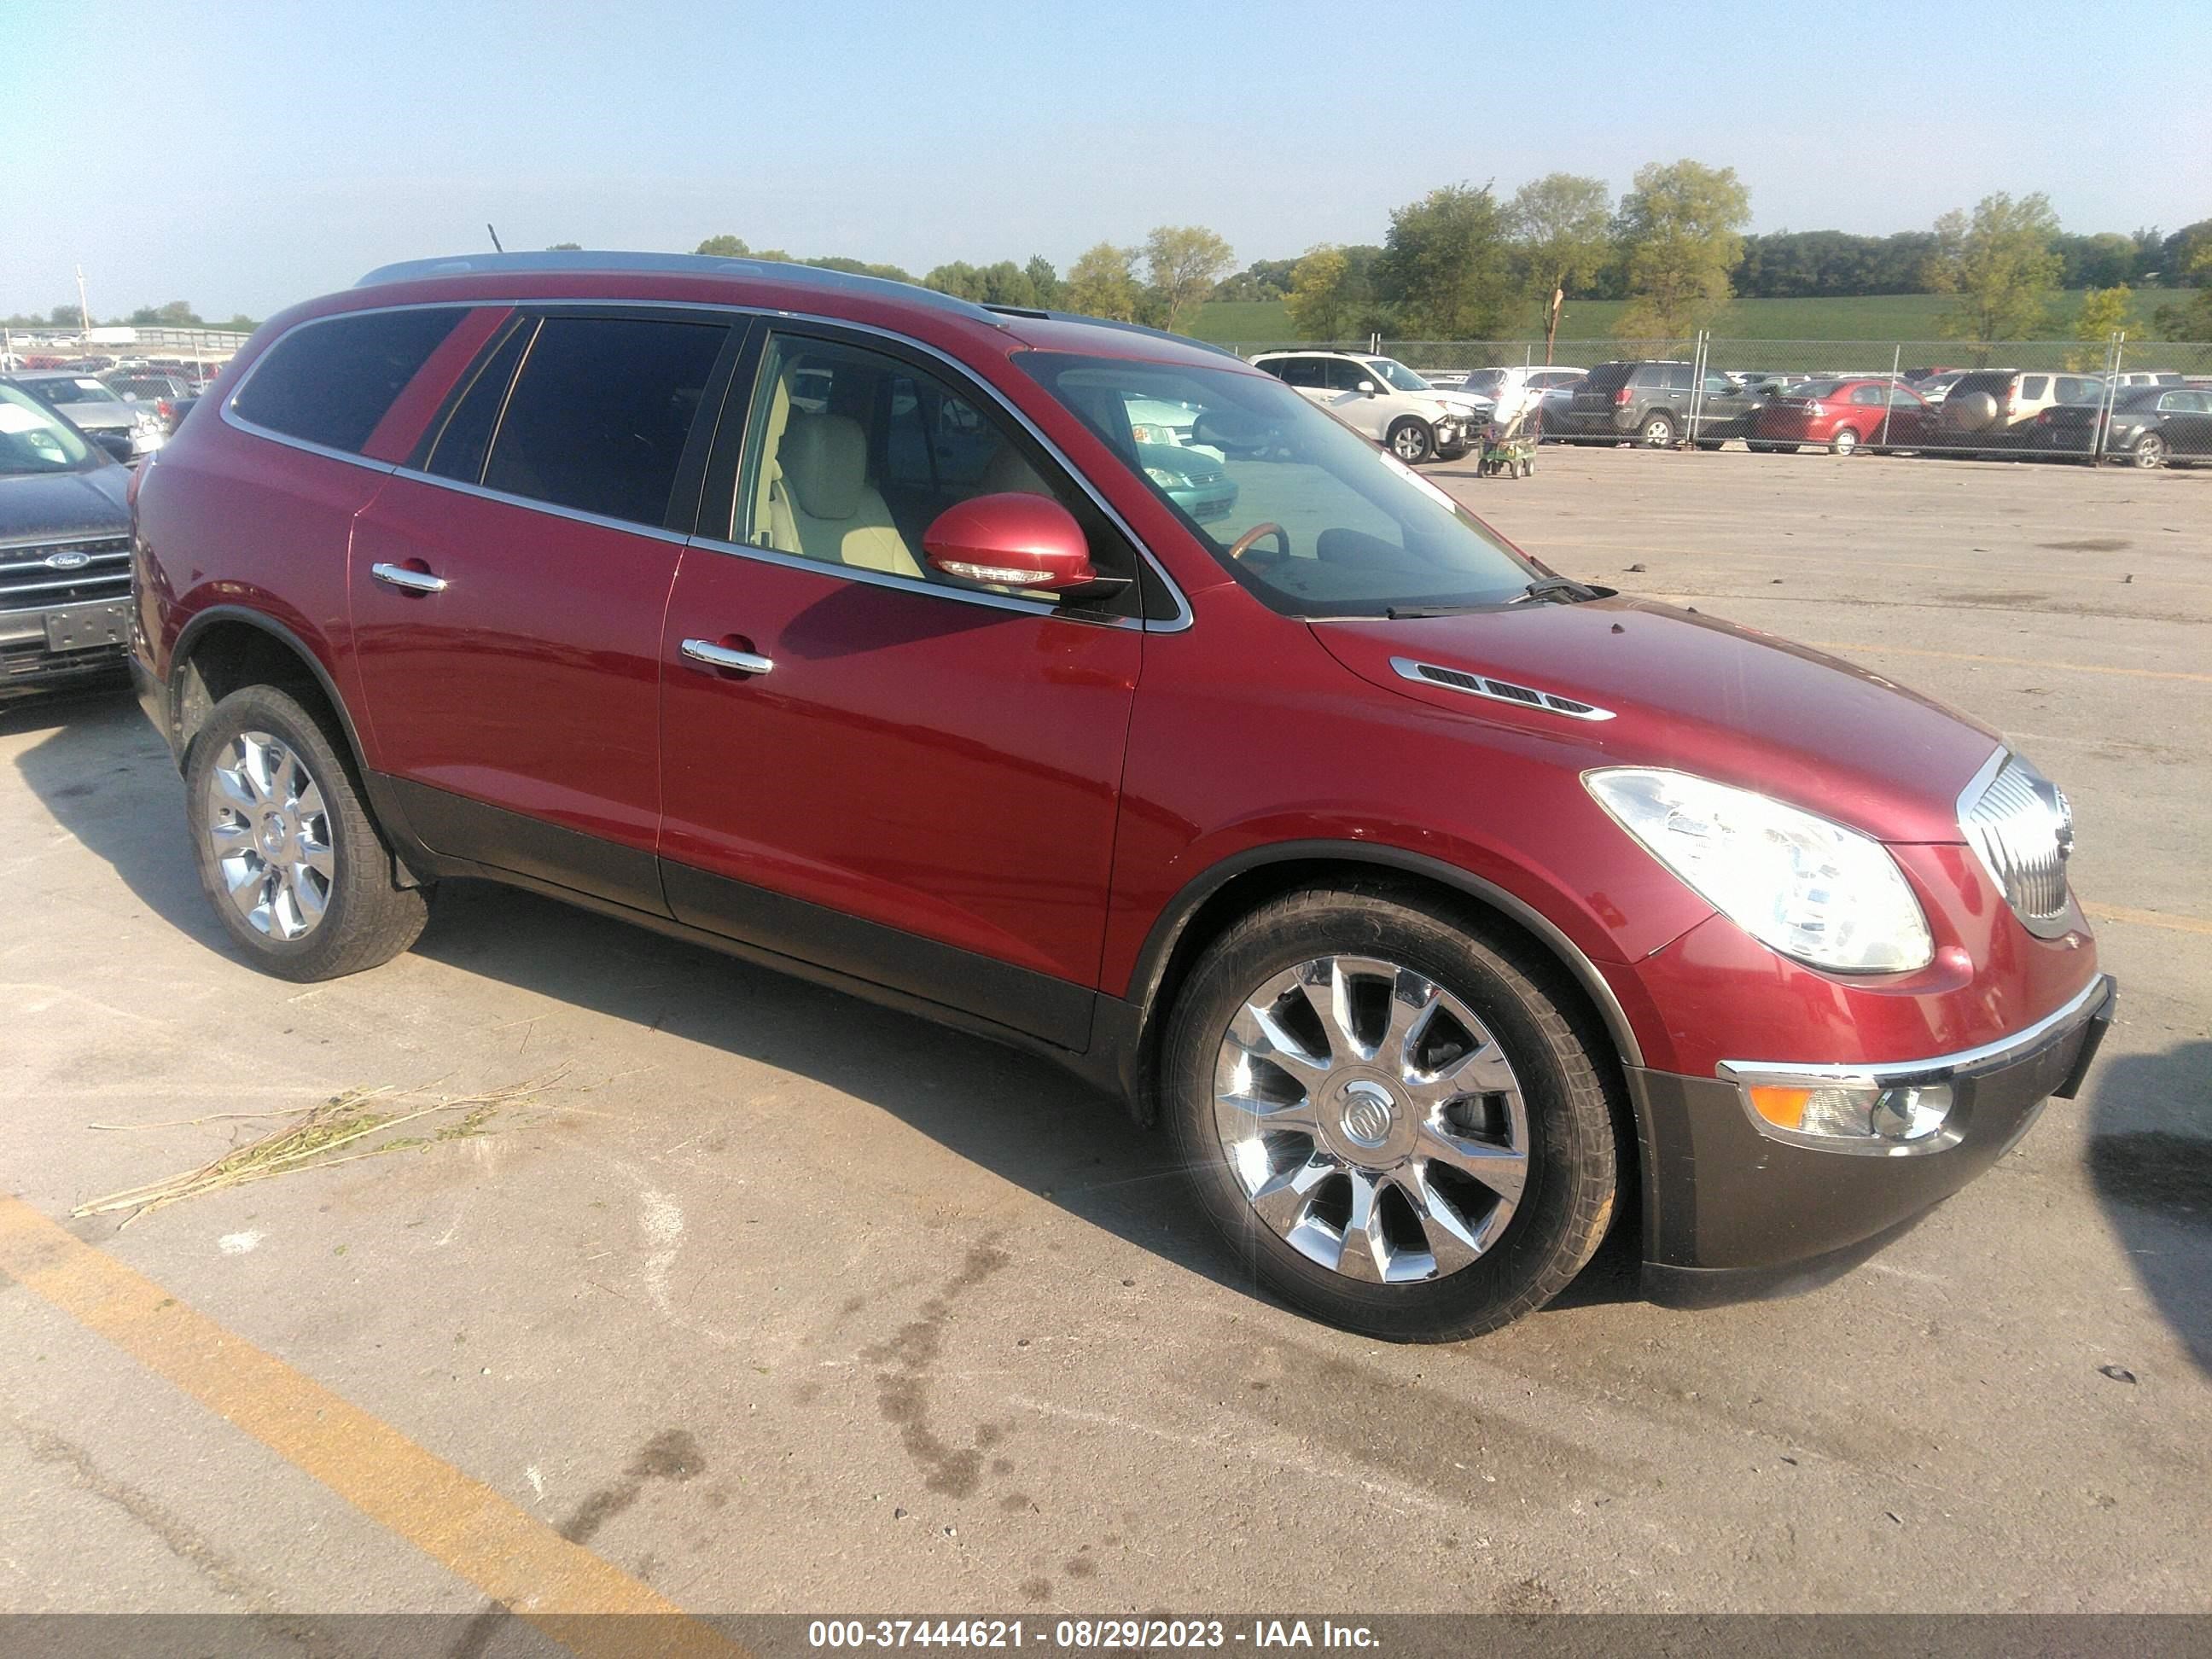 5GAKVCED8BJ335898  - BUICK ENCLAVE  2011 IMG - 0